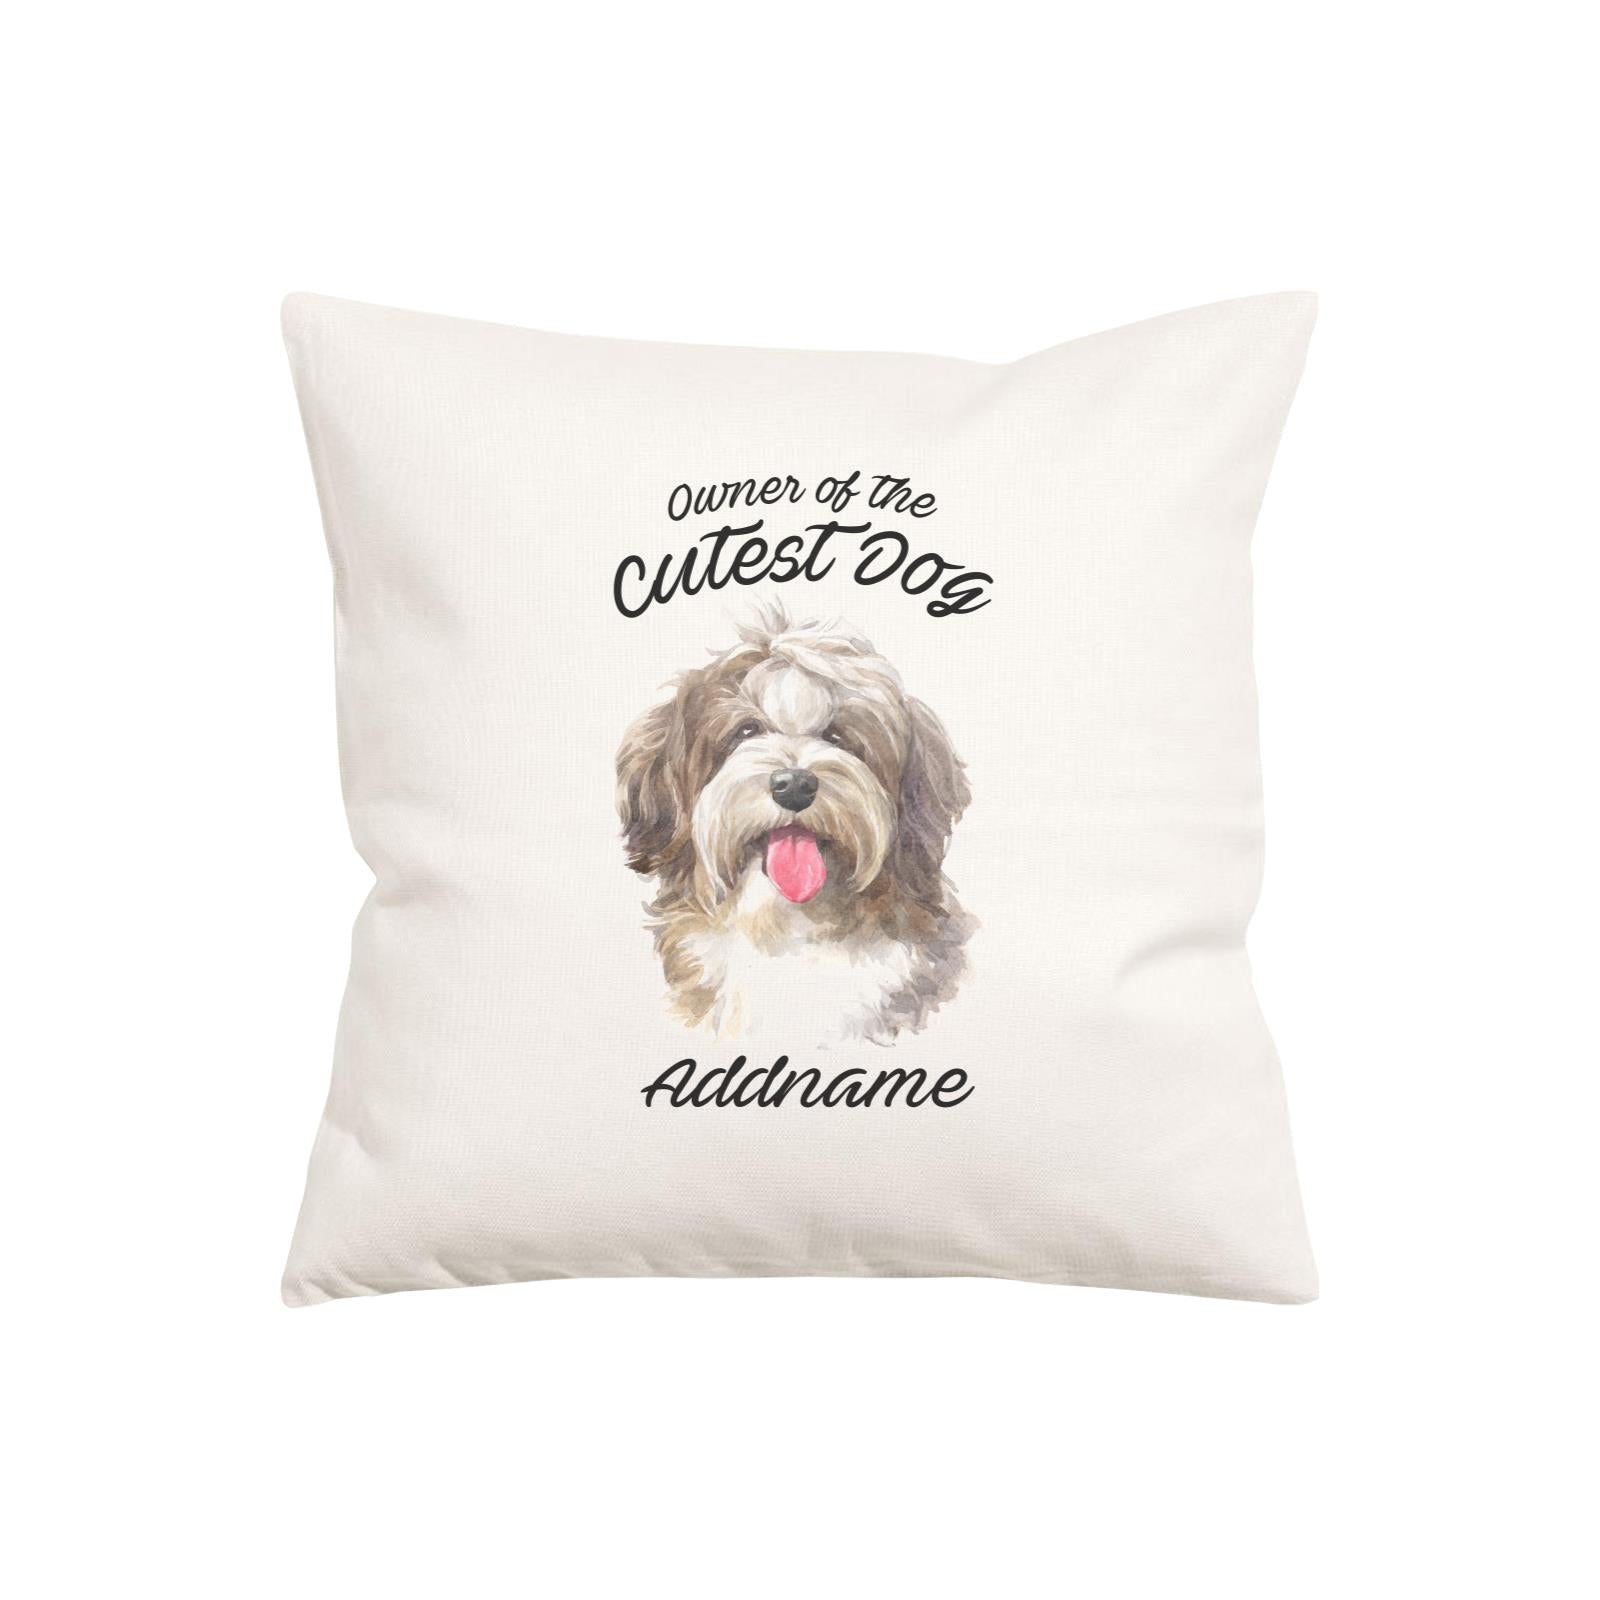 Watercolor Dog Owner Of The Cutest Dog Shaggy Havanese Addname Pillow Cushion